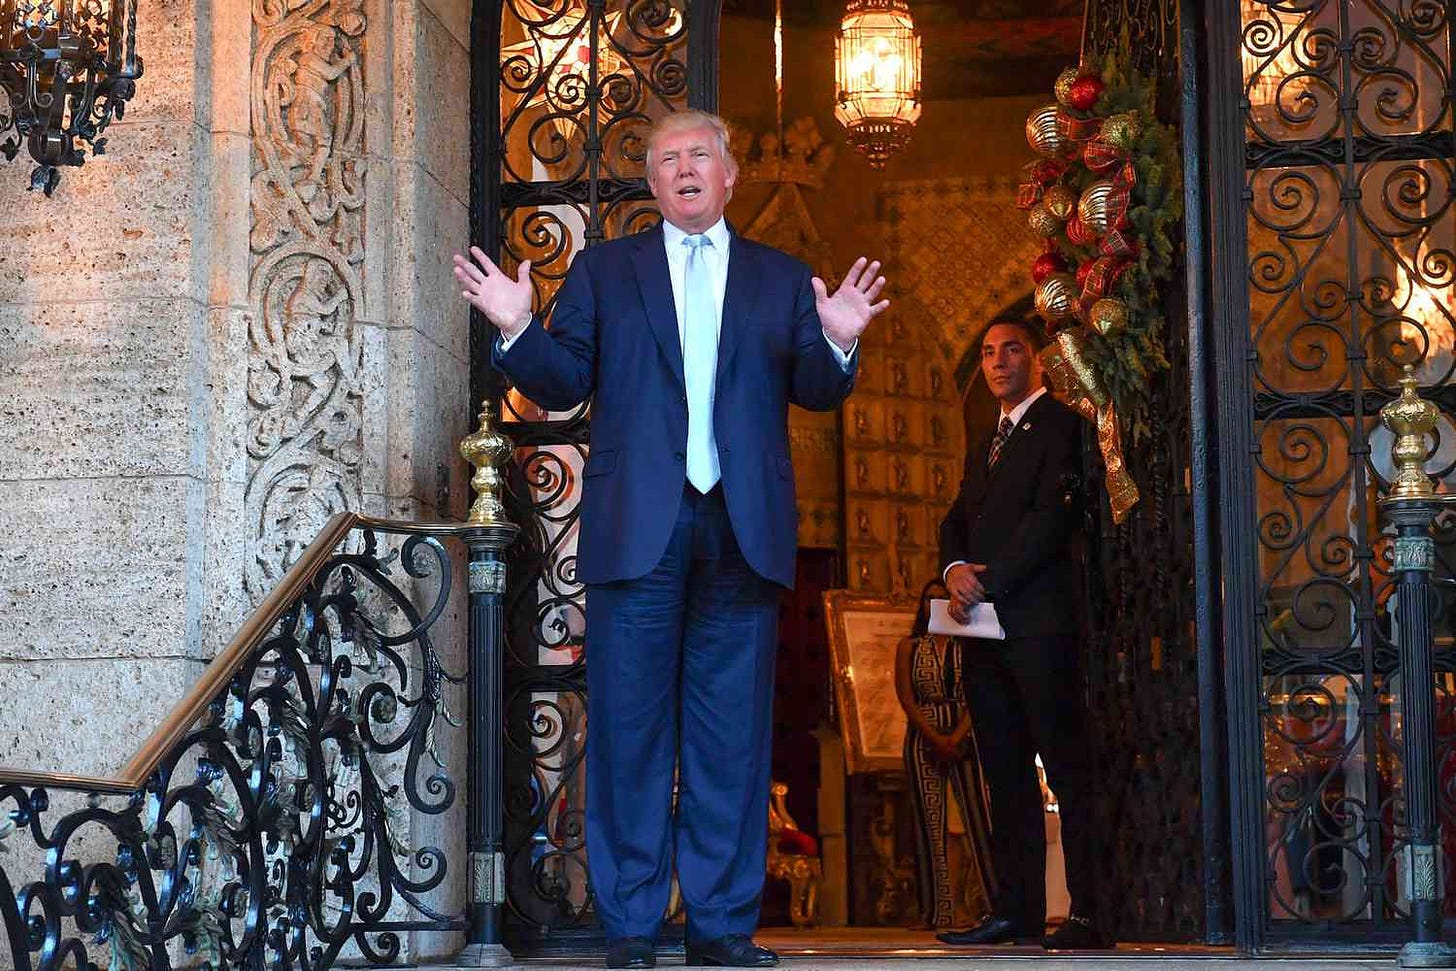 How Donald Trump's Mar-a-Lago Shaped His Presidency